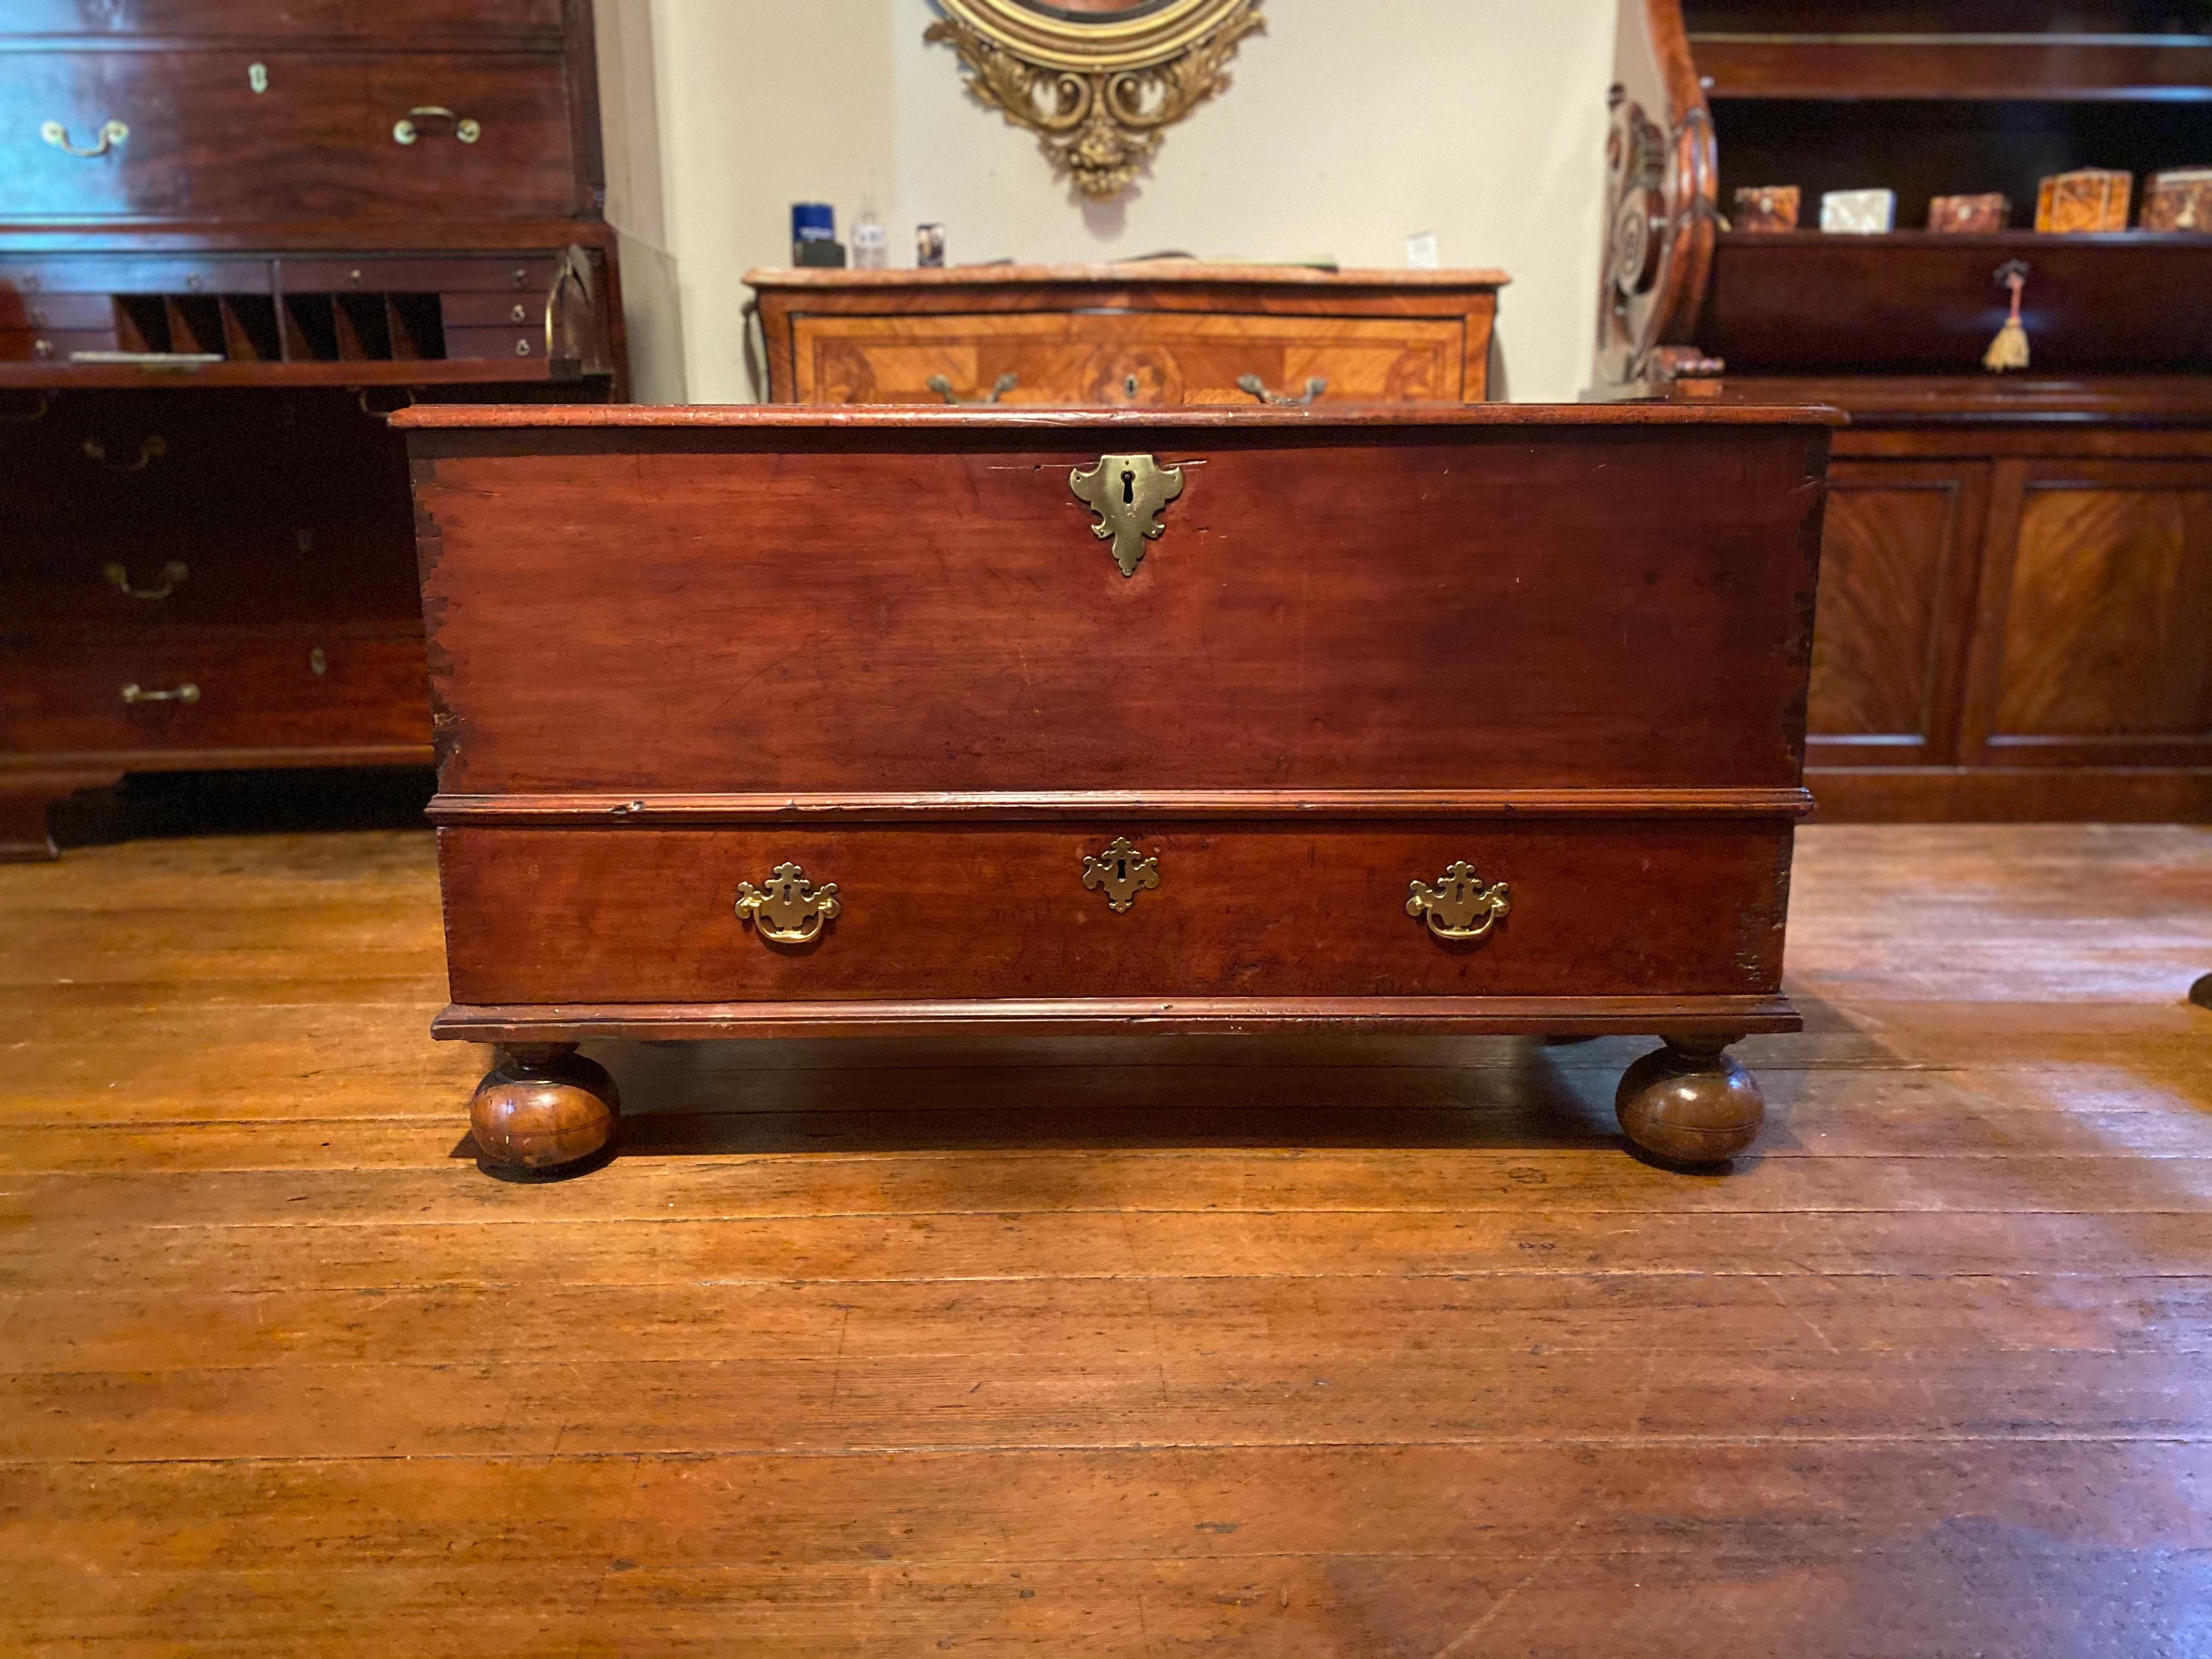 Very good quality late 17th-early 18th century Bermuda blanket chest made of Bermuda Cedar with a drawer. See dovetails- these decorative dovetails were only done in Bermuda and Cuba. The foot construction (attached to the bottom with battons) is